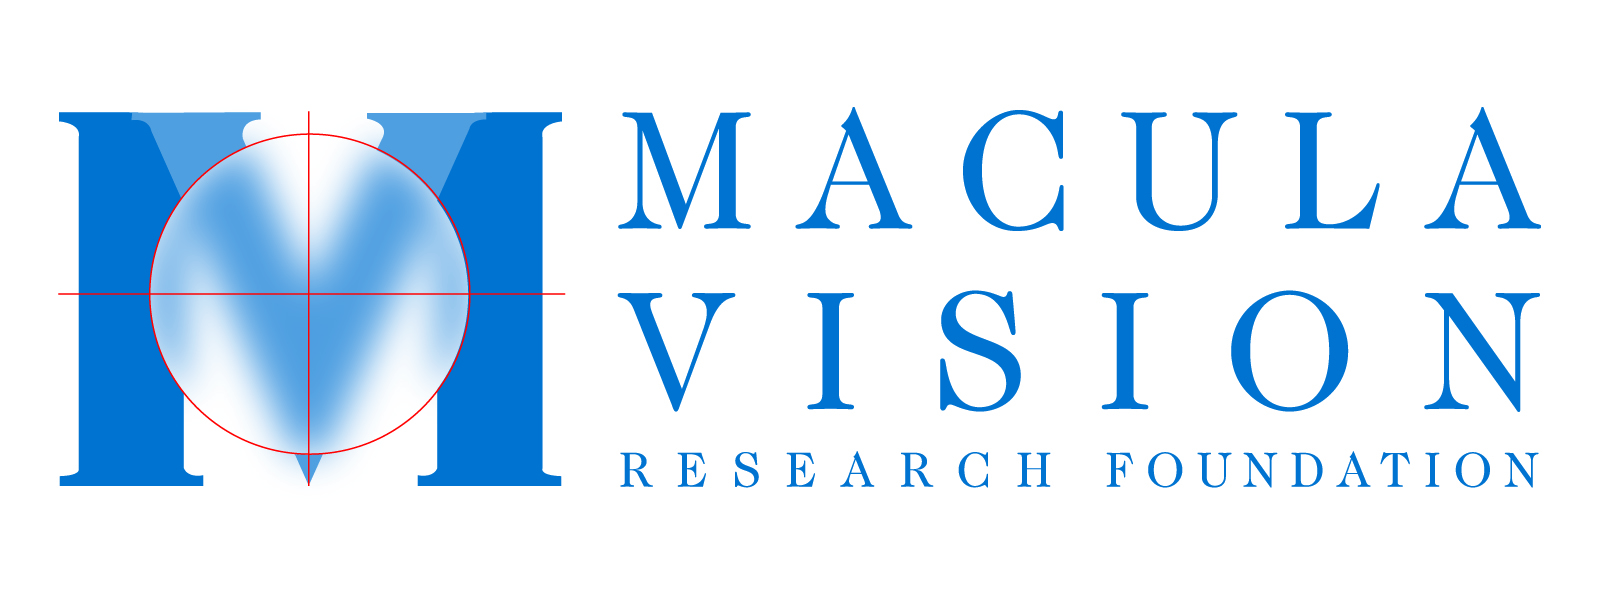 The Macula Vision Research Foundation